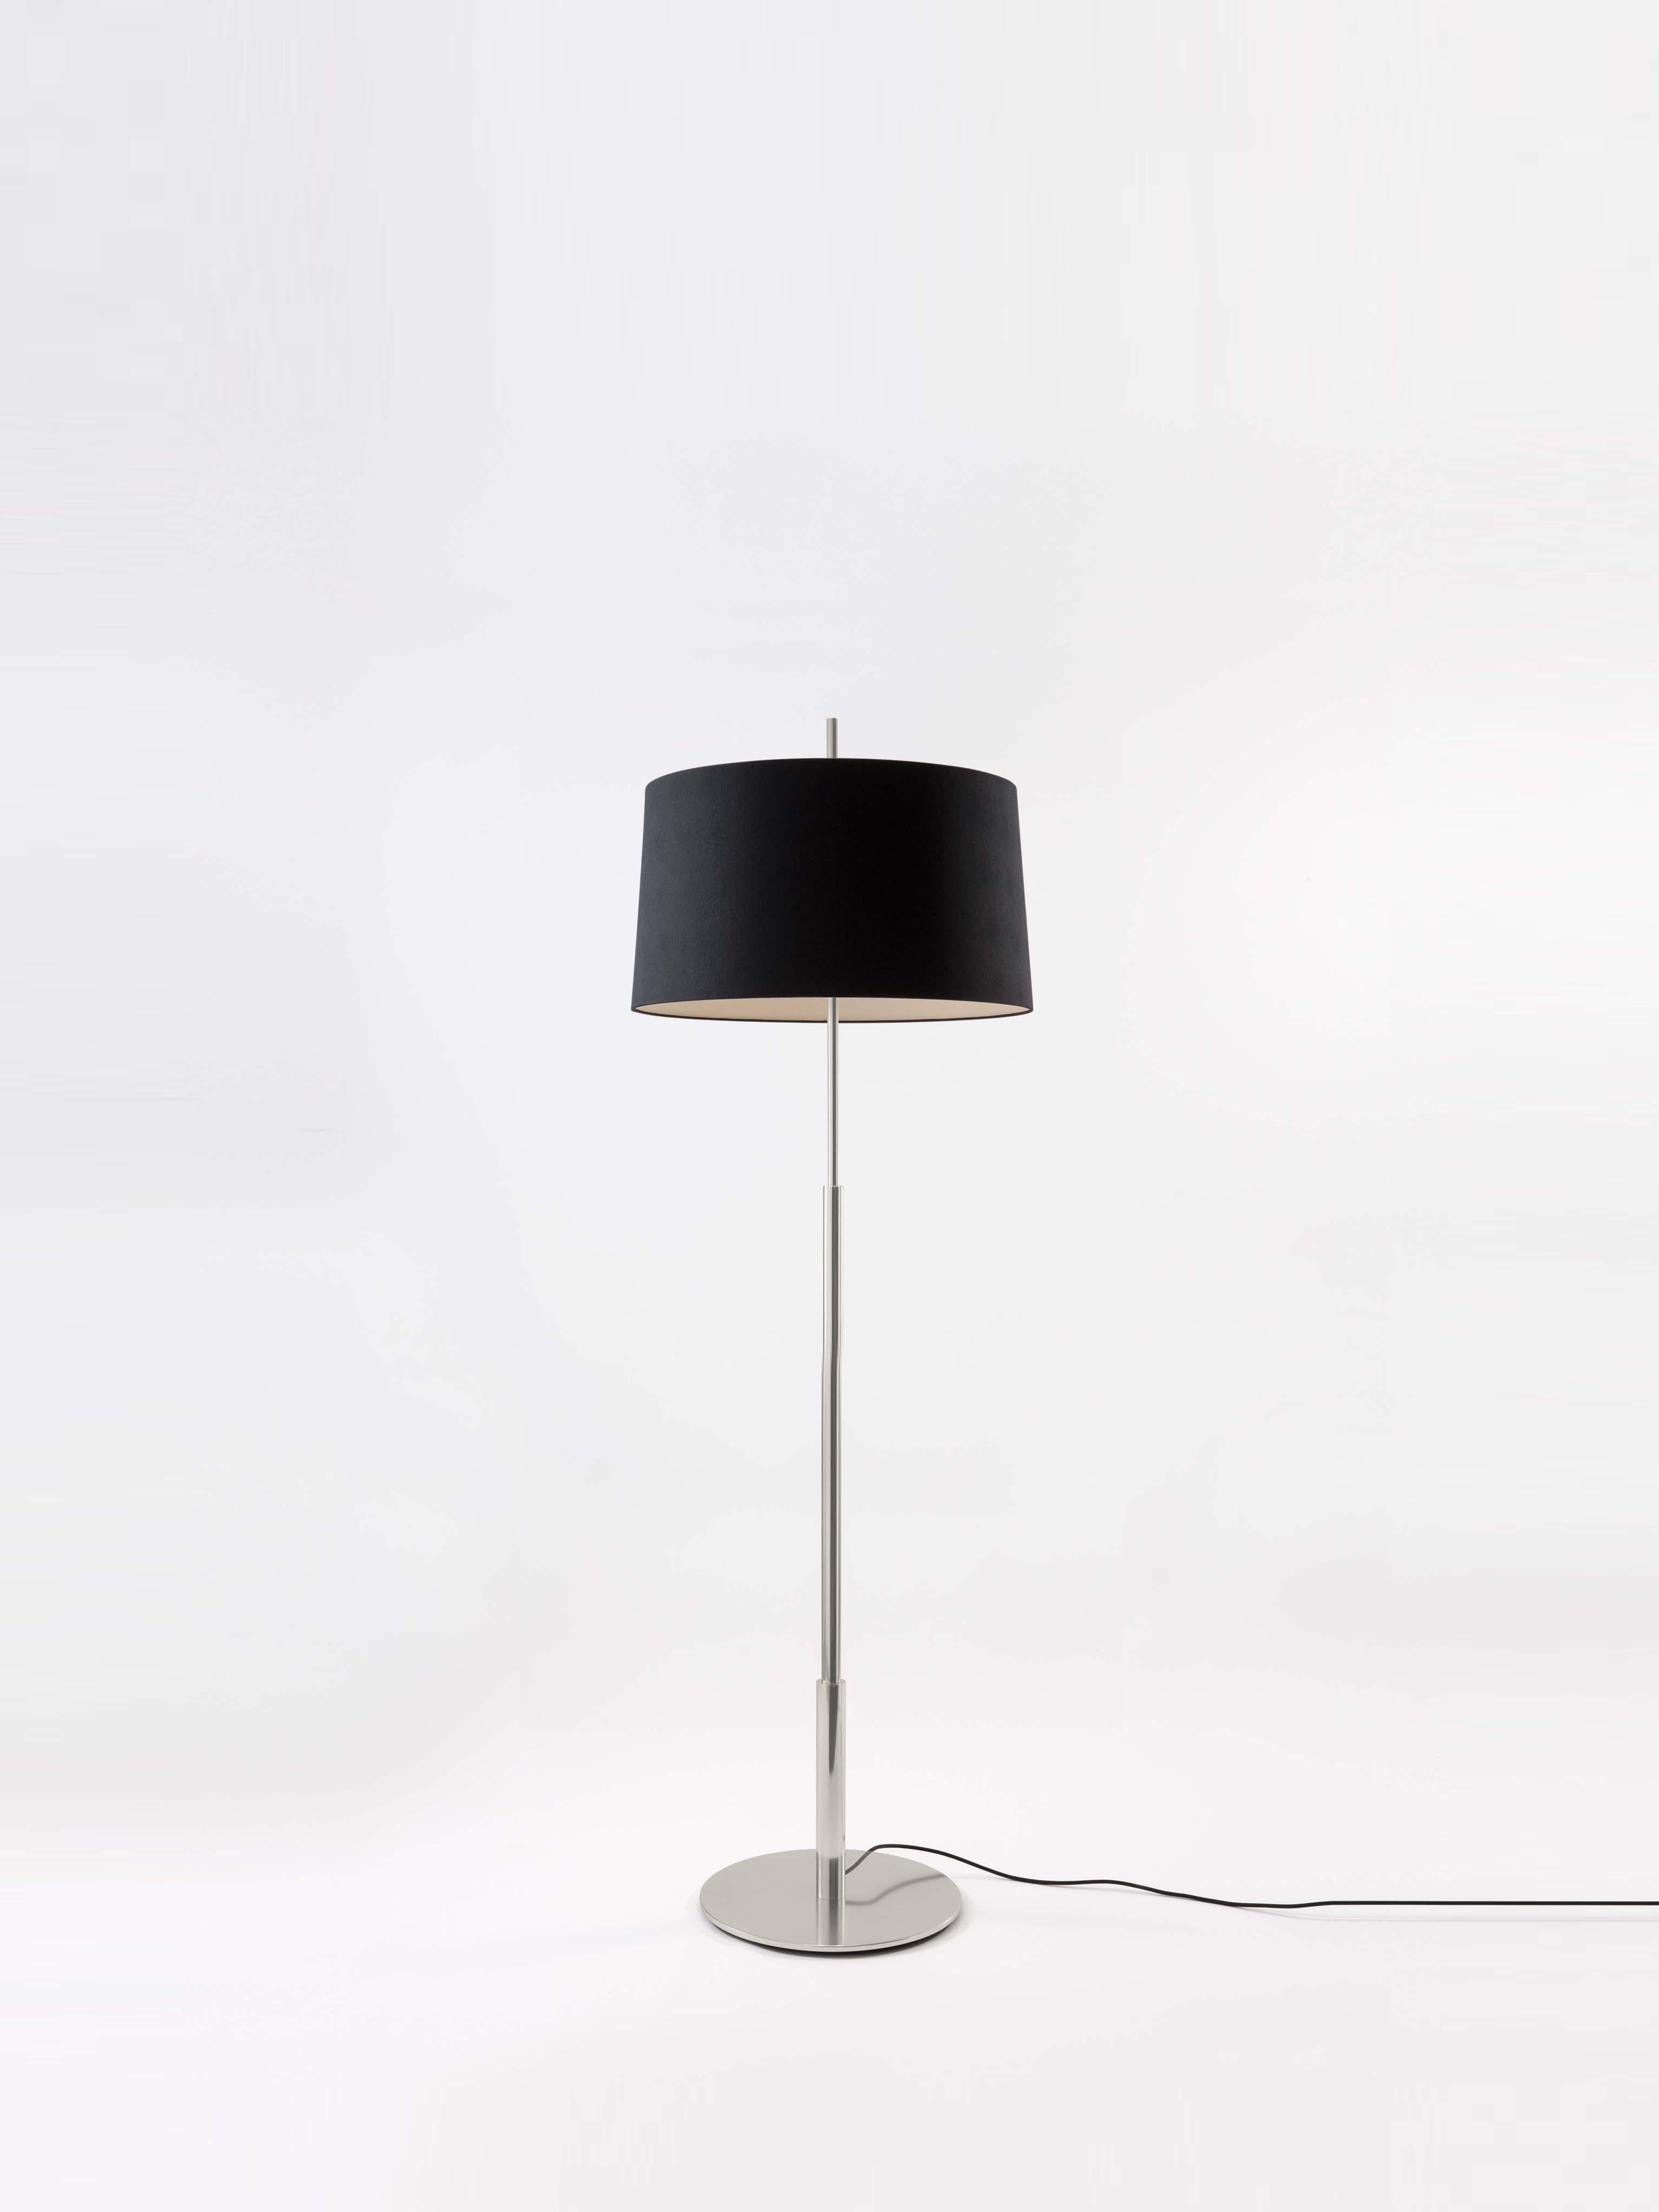 Nickel Diana floor lamp by Federico Correa, Alfonso Milá, Miguel Milá
Dimensions: D 58 x H 183 cm
Materials: Metal, linen.
Available in nickel or gold and in black or white shade.

In keeping with the calling of its creators, the Diana lamp has